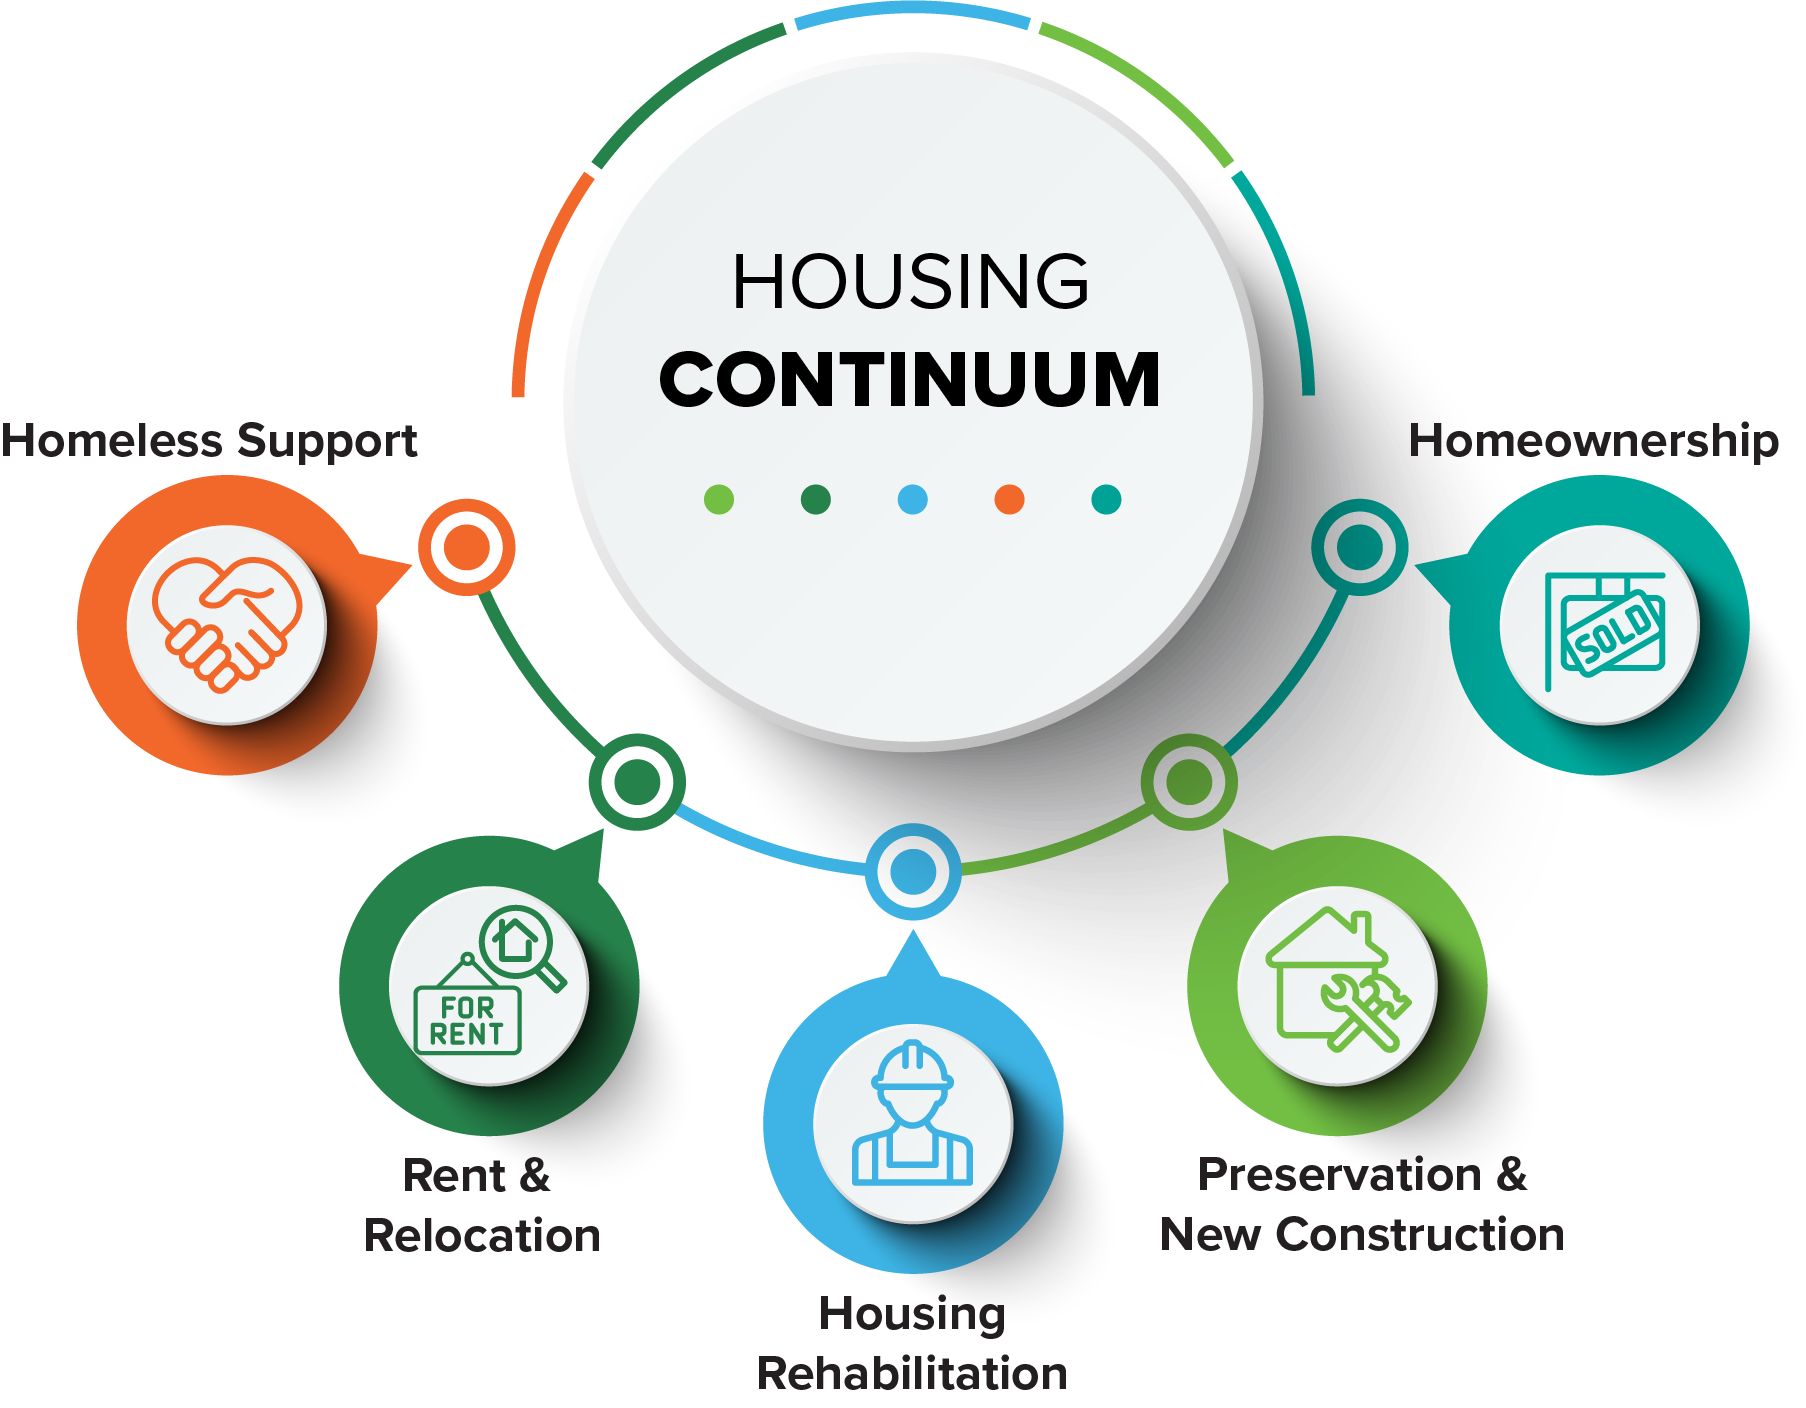 Housing Continuum Graphic showing how homeless support, rent and relocation, housing rehabilitation, preservation and new construction, and homeownership are all connected. 